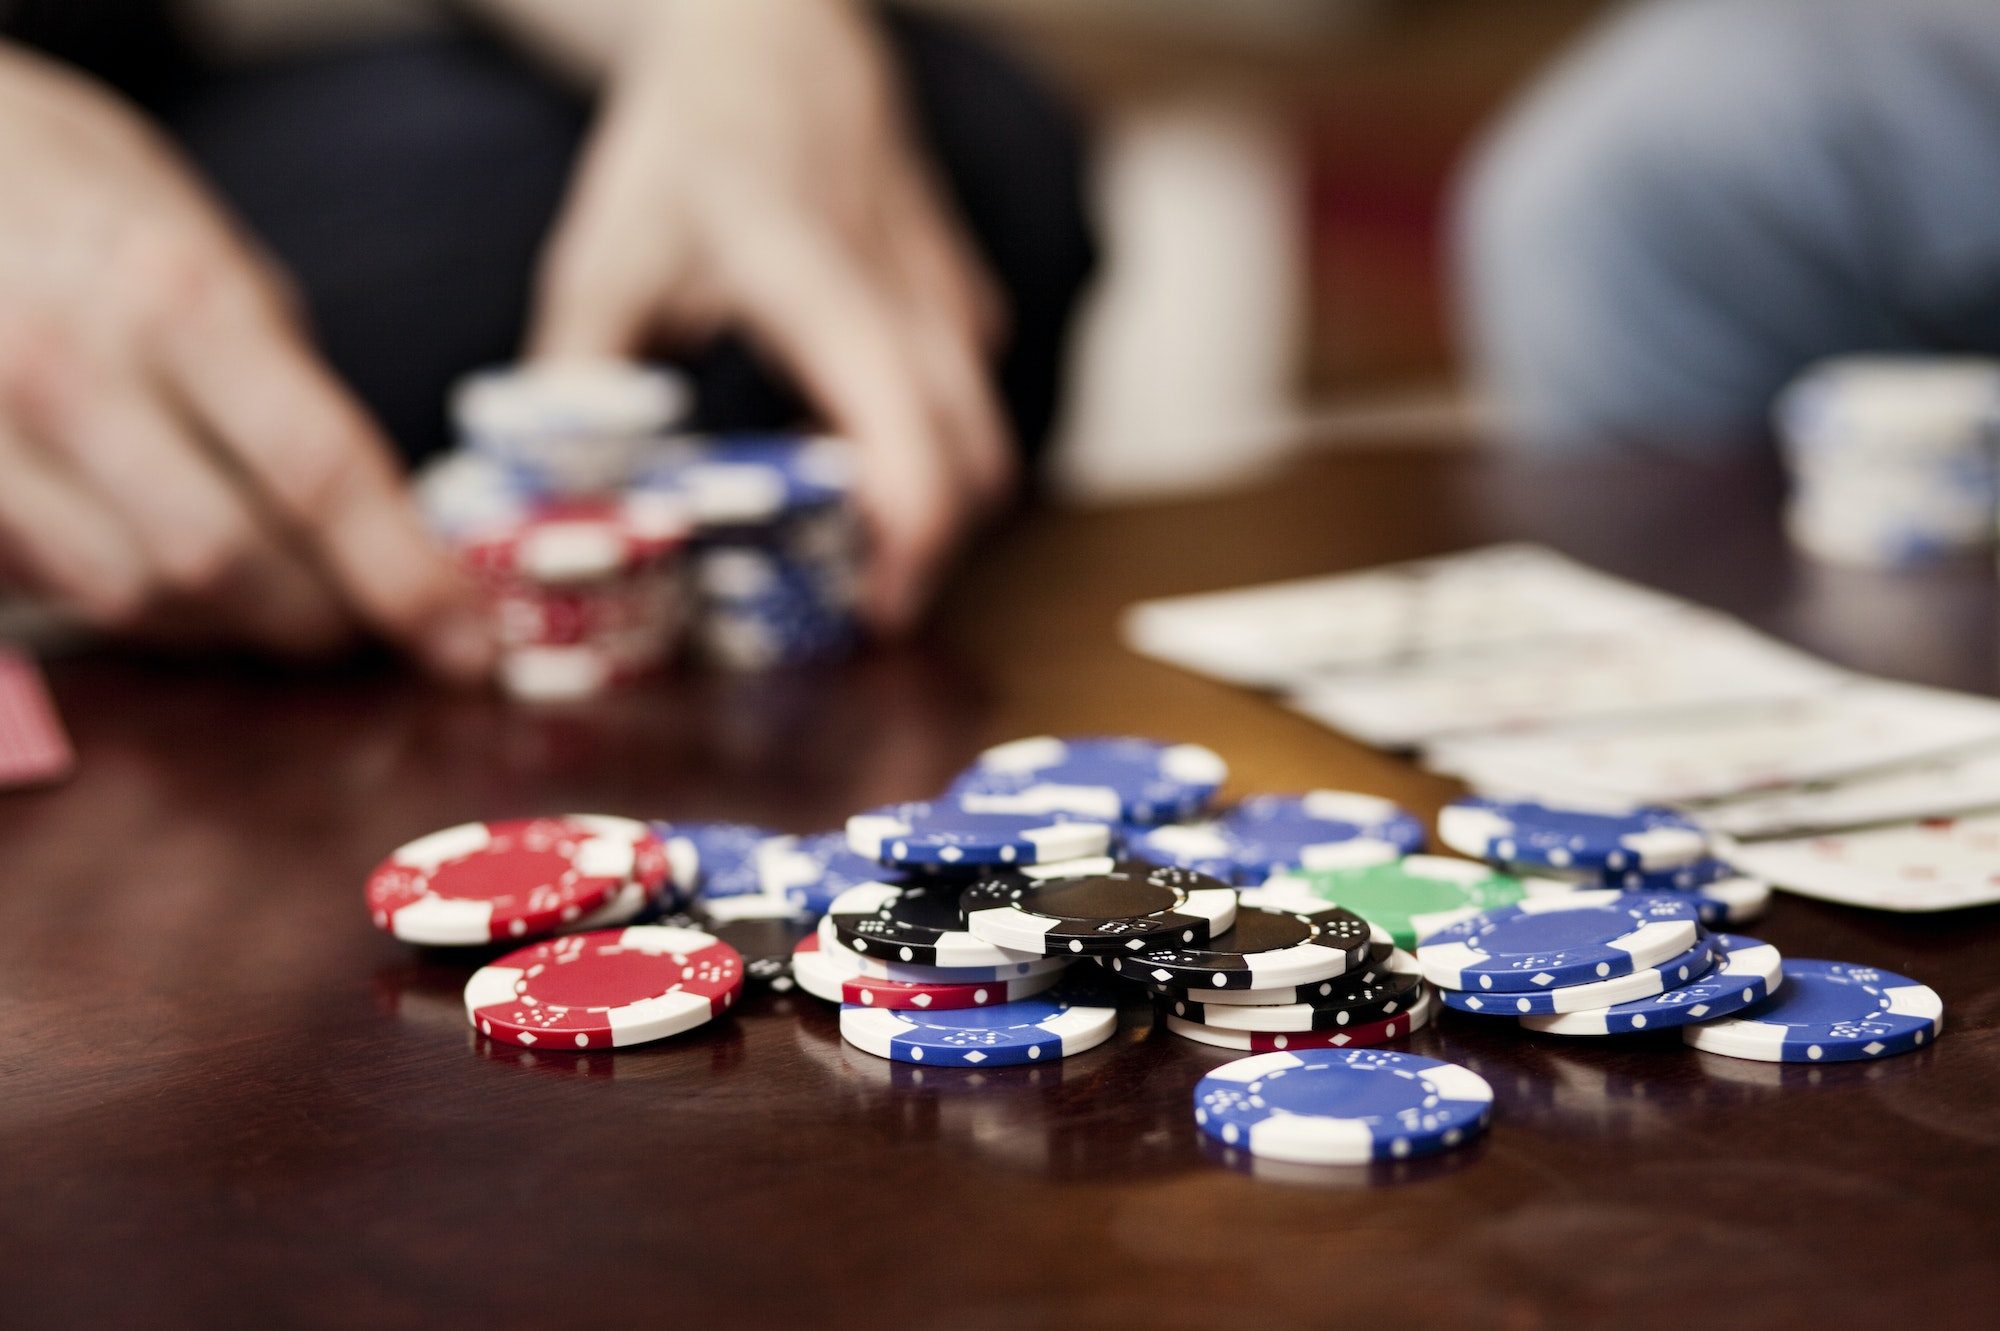 Gambling chips on table at casino